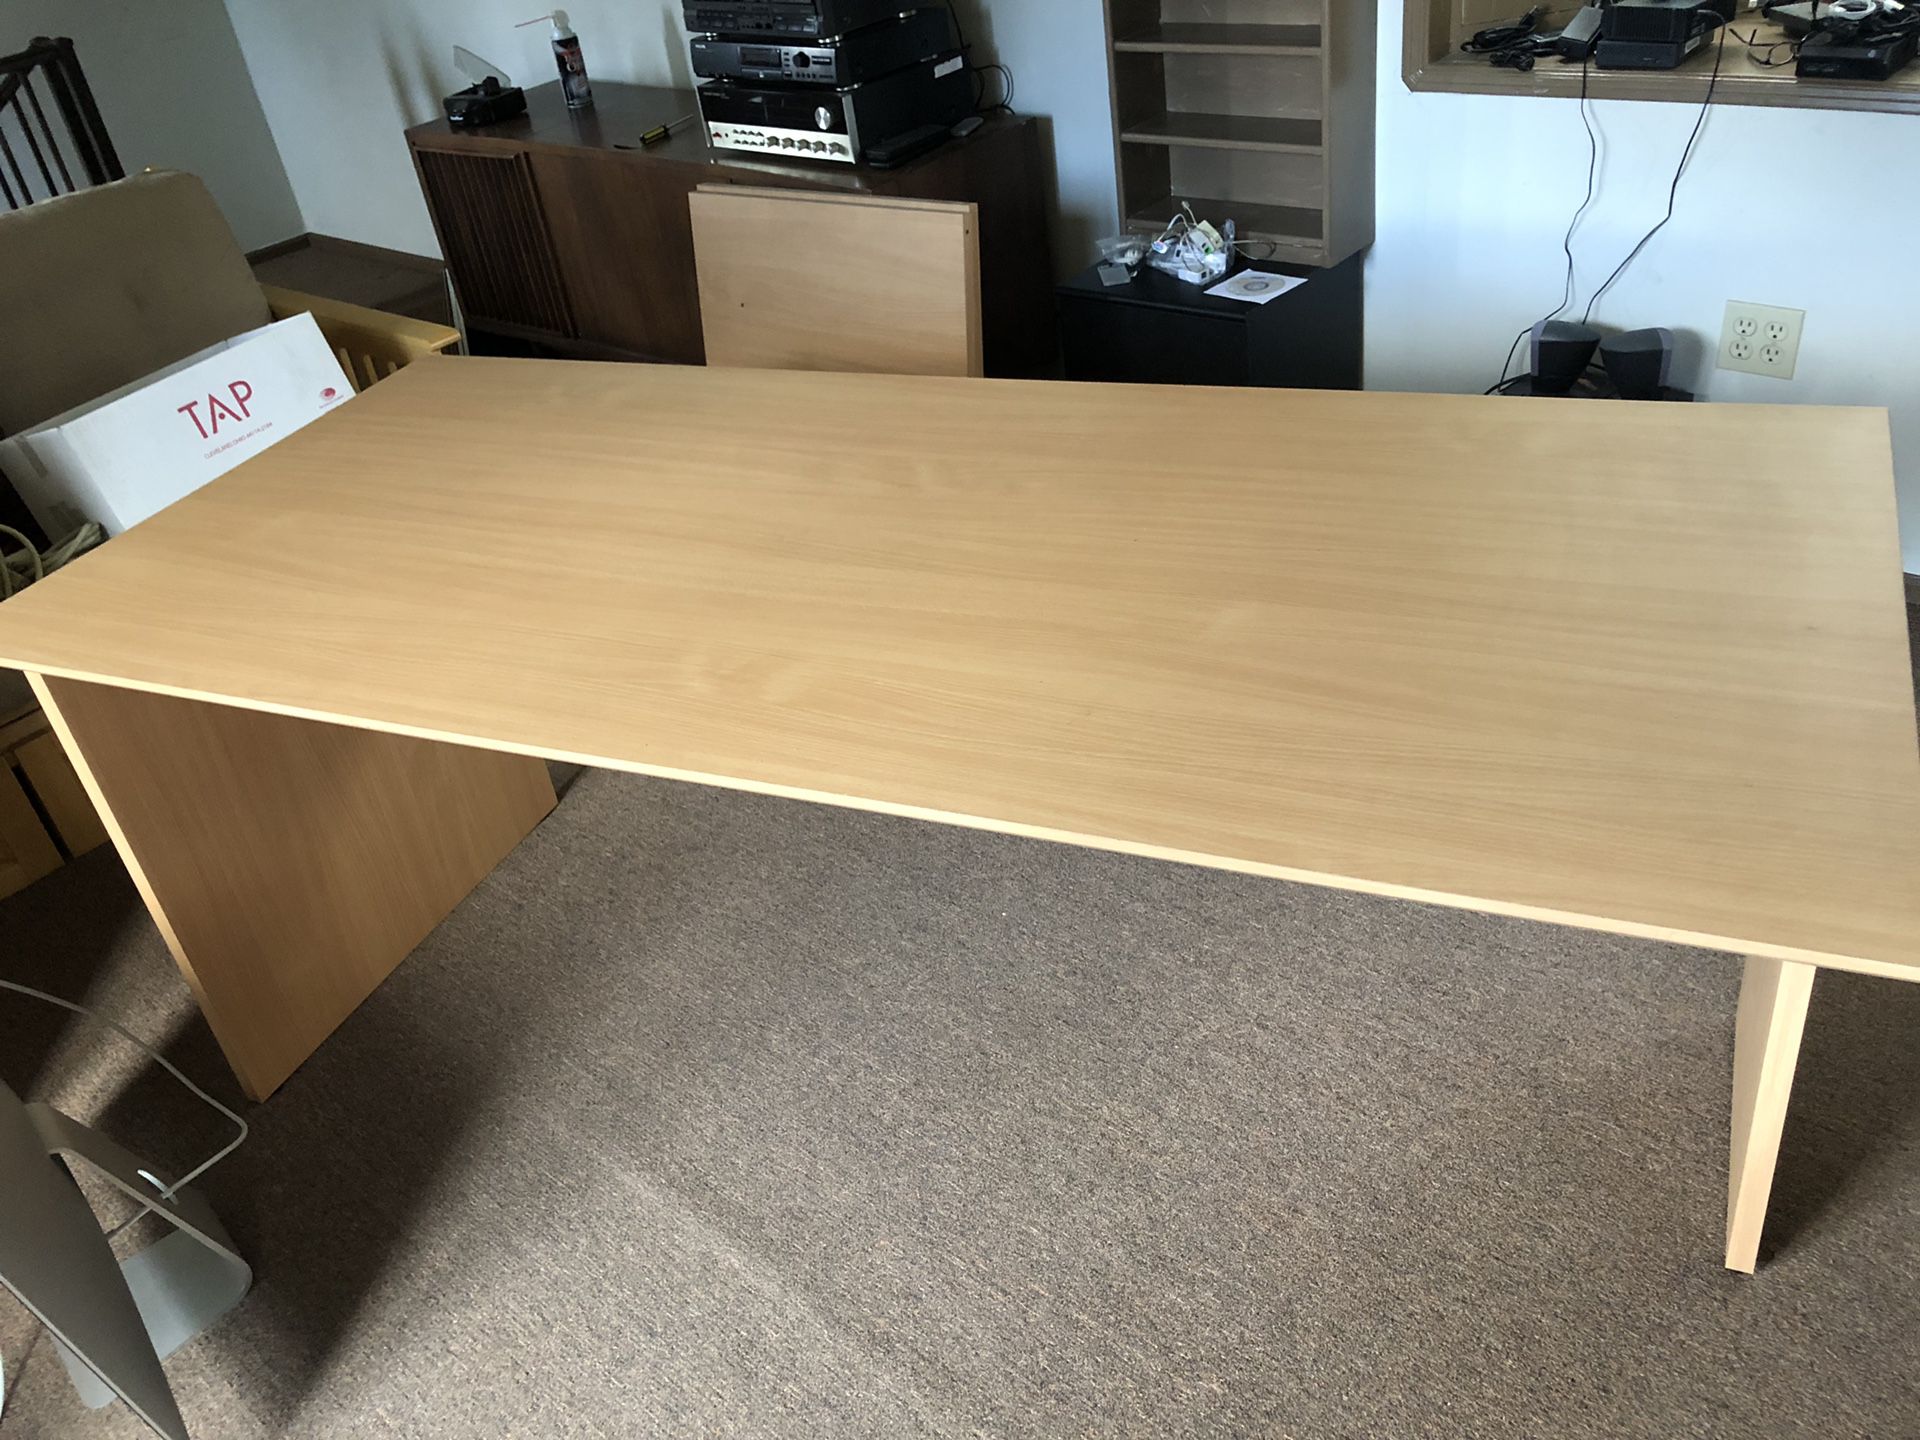 Large office furniture